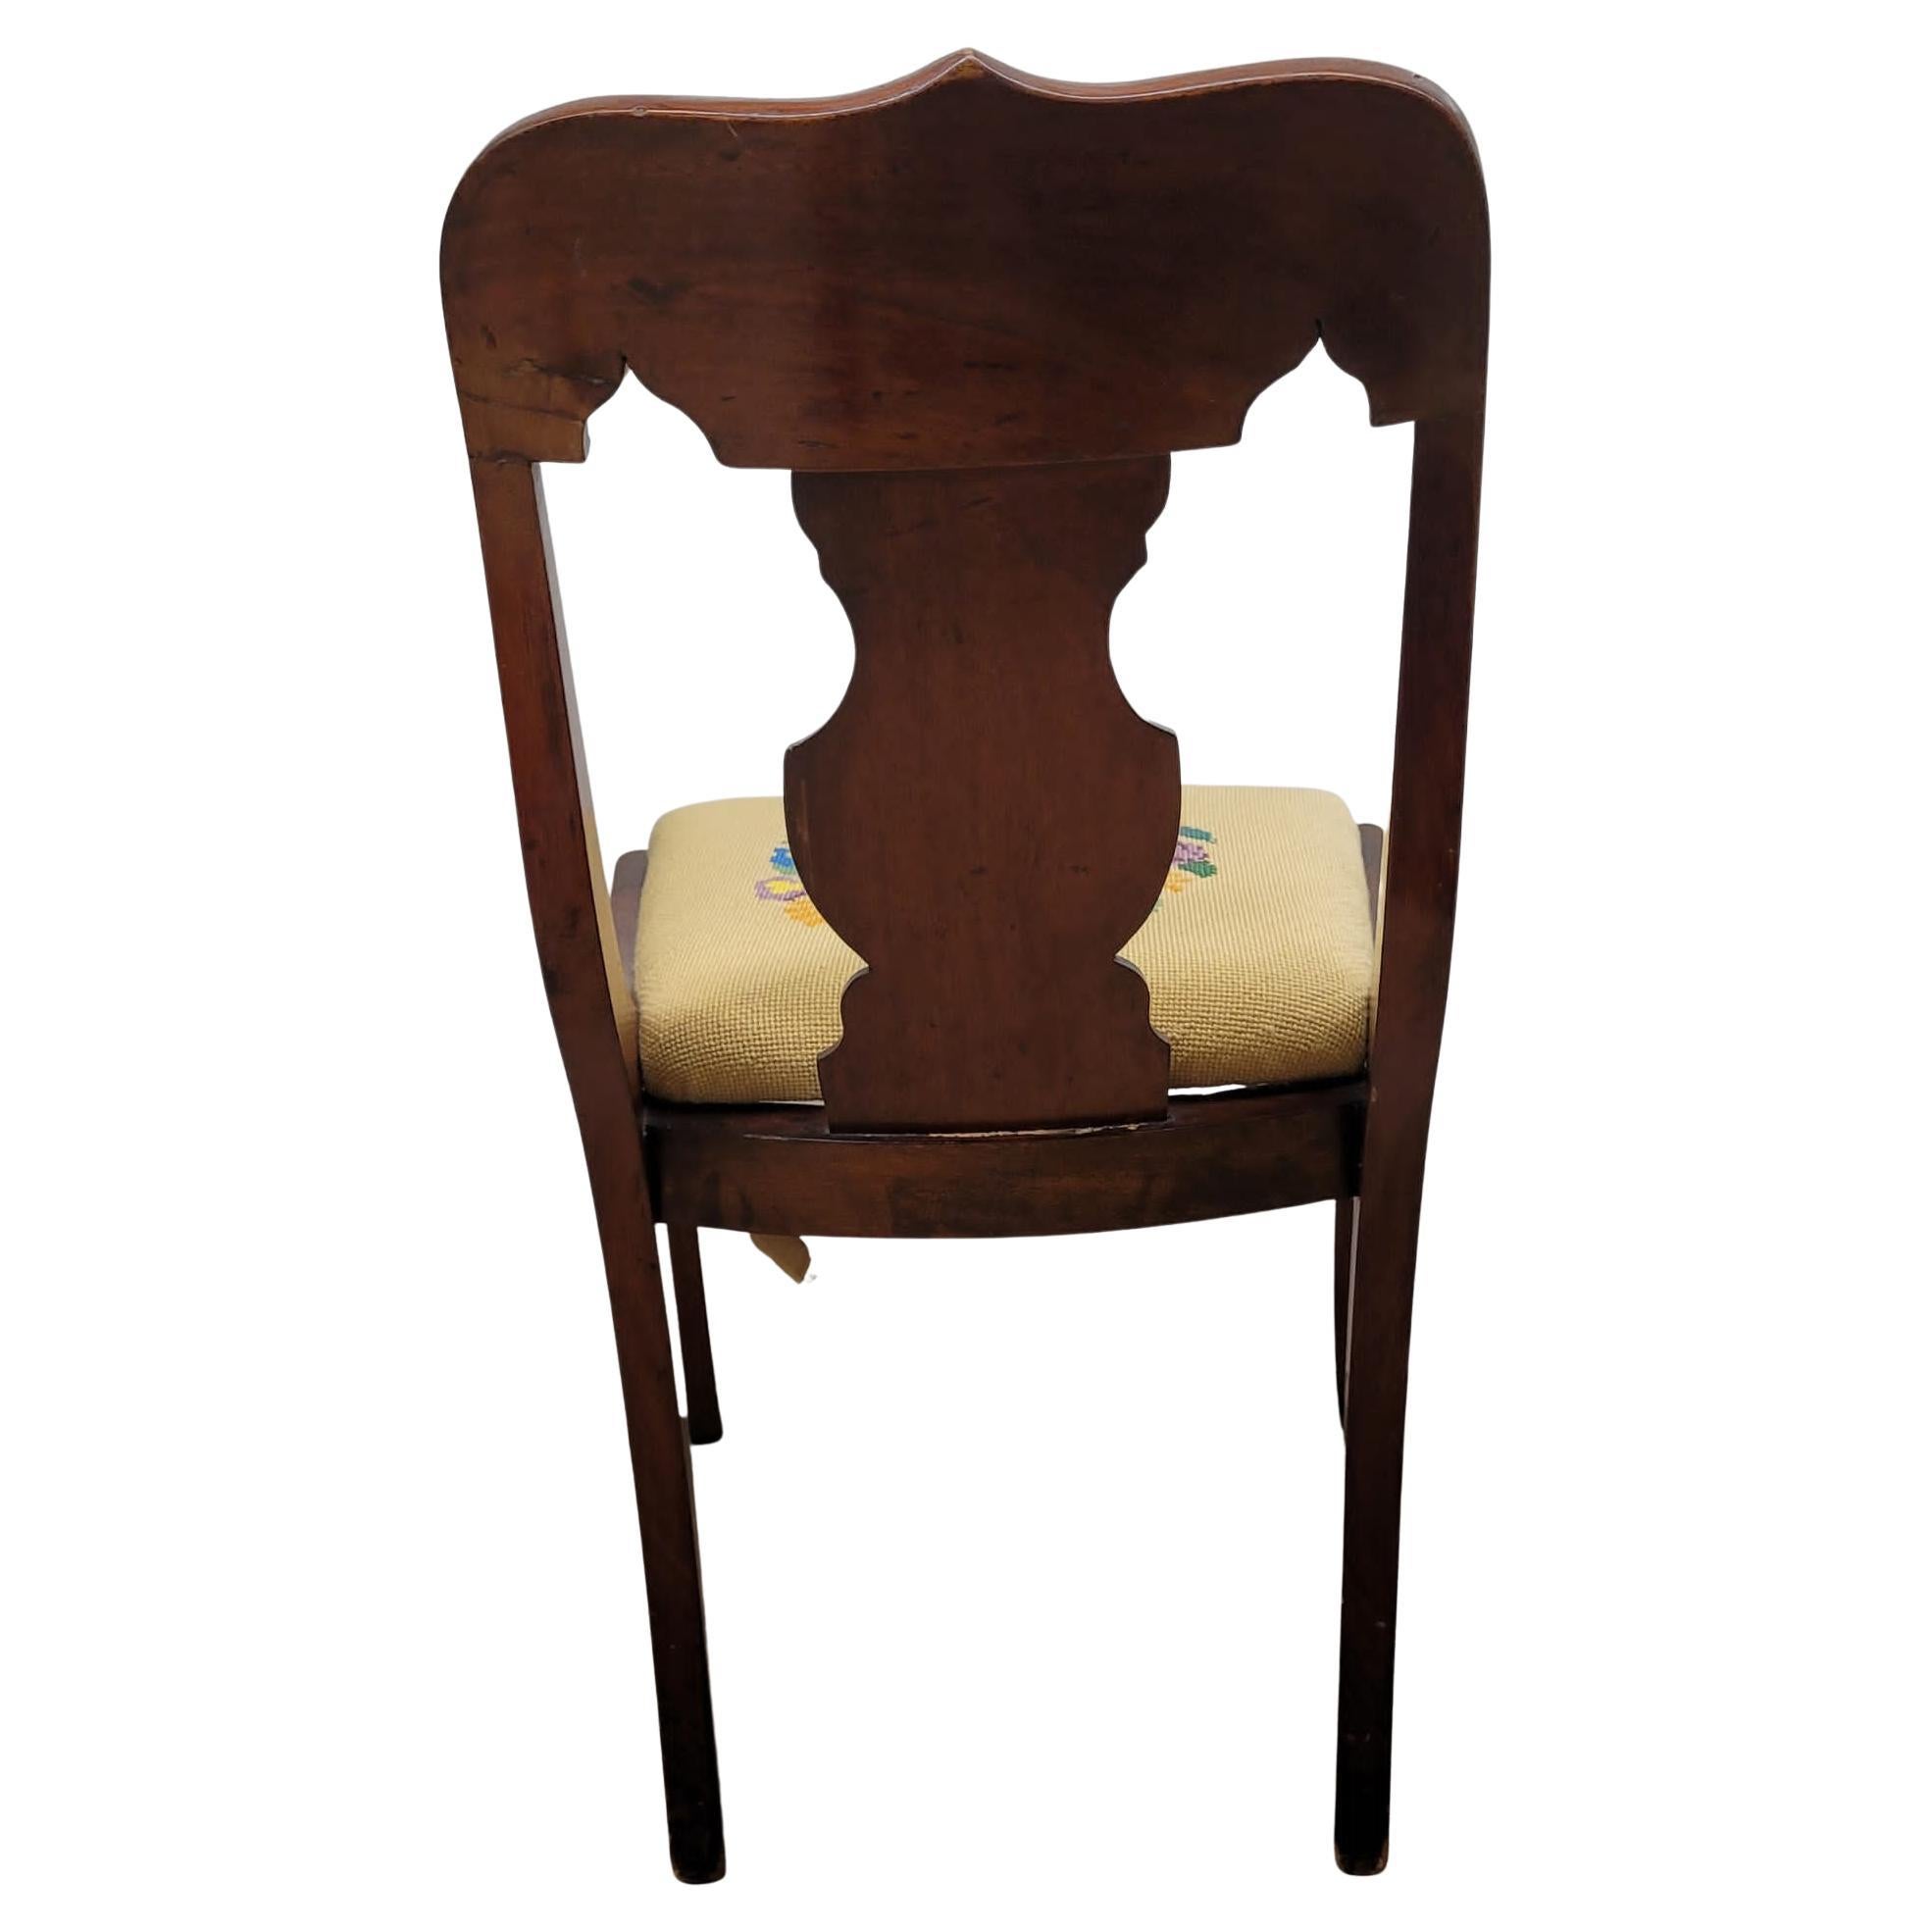 20th Century American Empire Mahogany and Needlepoint Upholstered Chair, circa 1890s For Sale